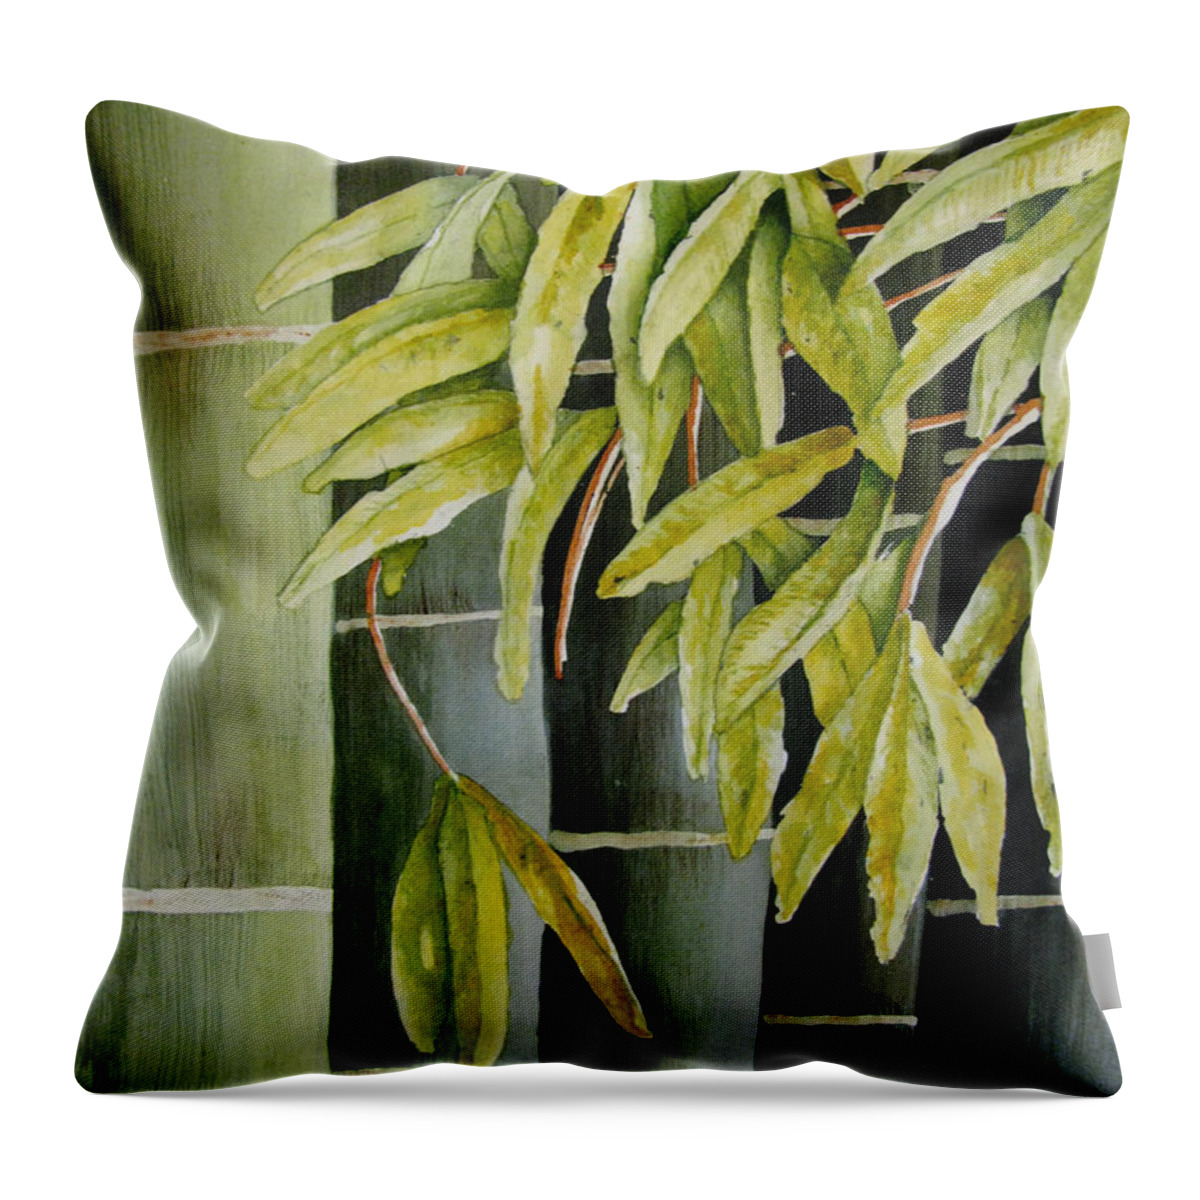 Bamboo Throw Pillow featuring the painting Bamboo by April Burton